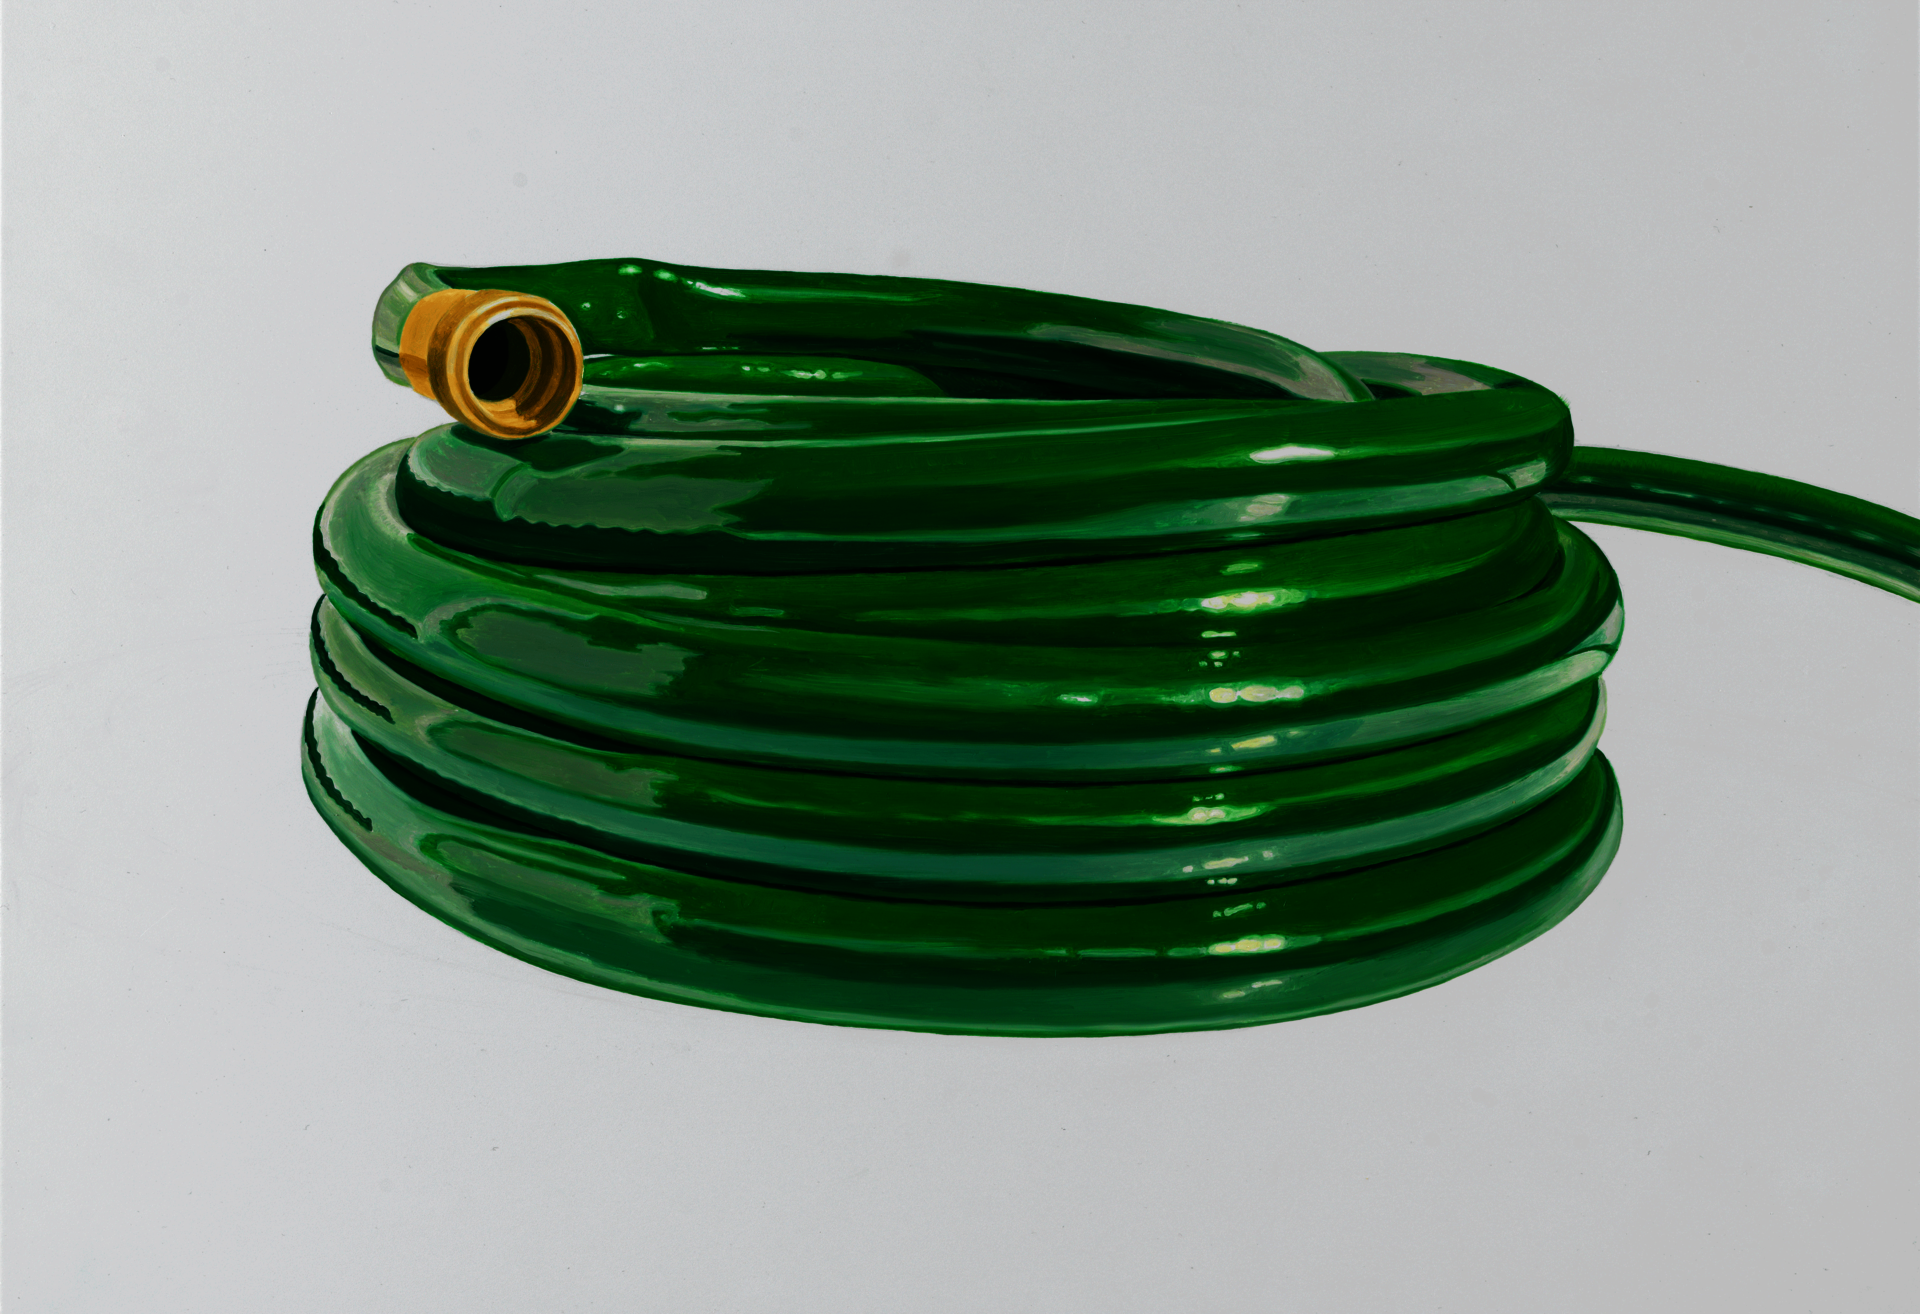 Oil painting of a coiled green garden hose  on a white background